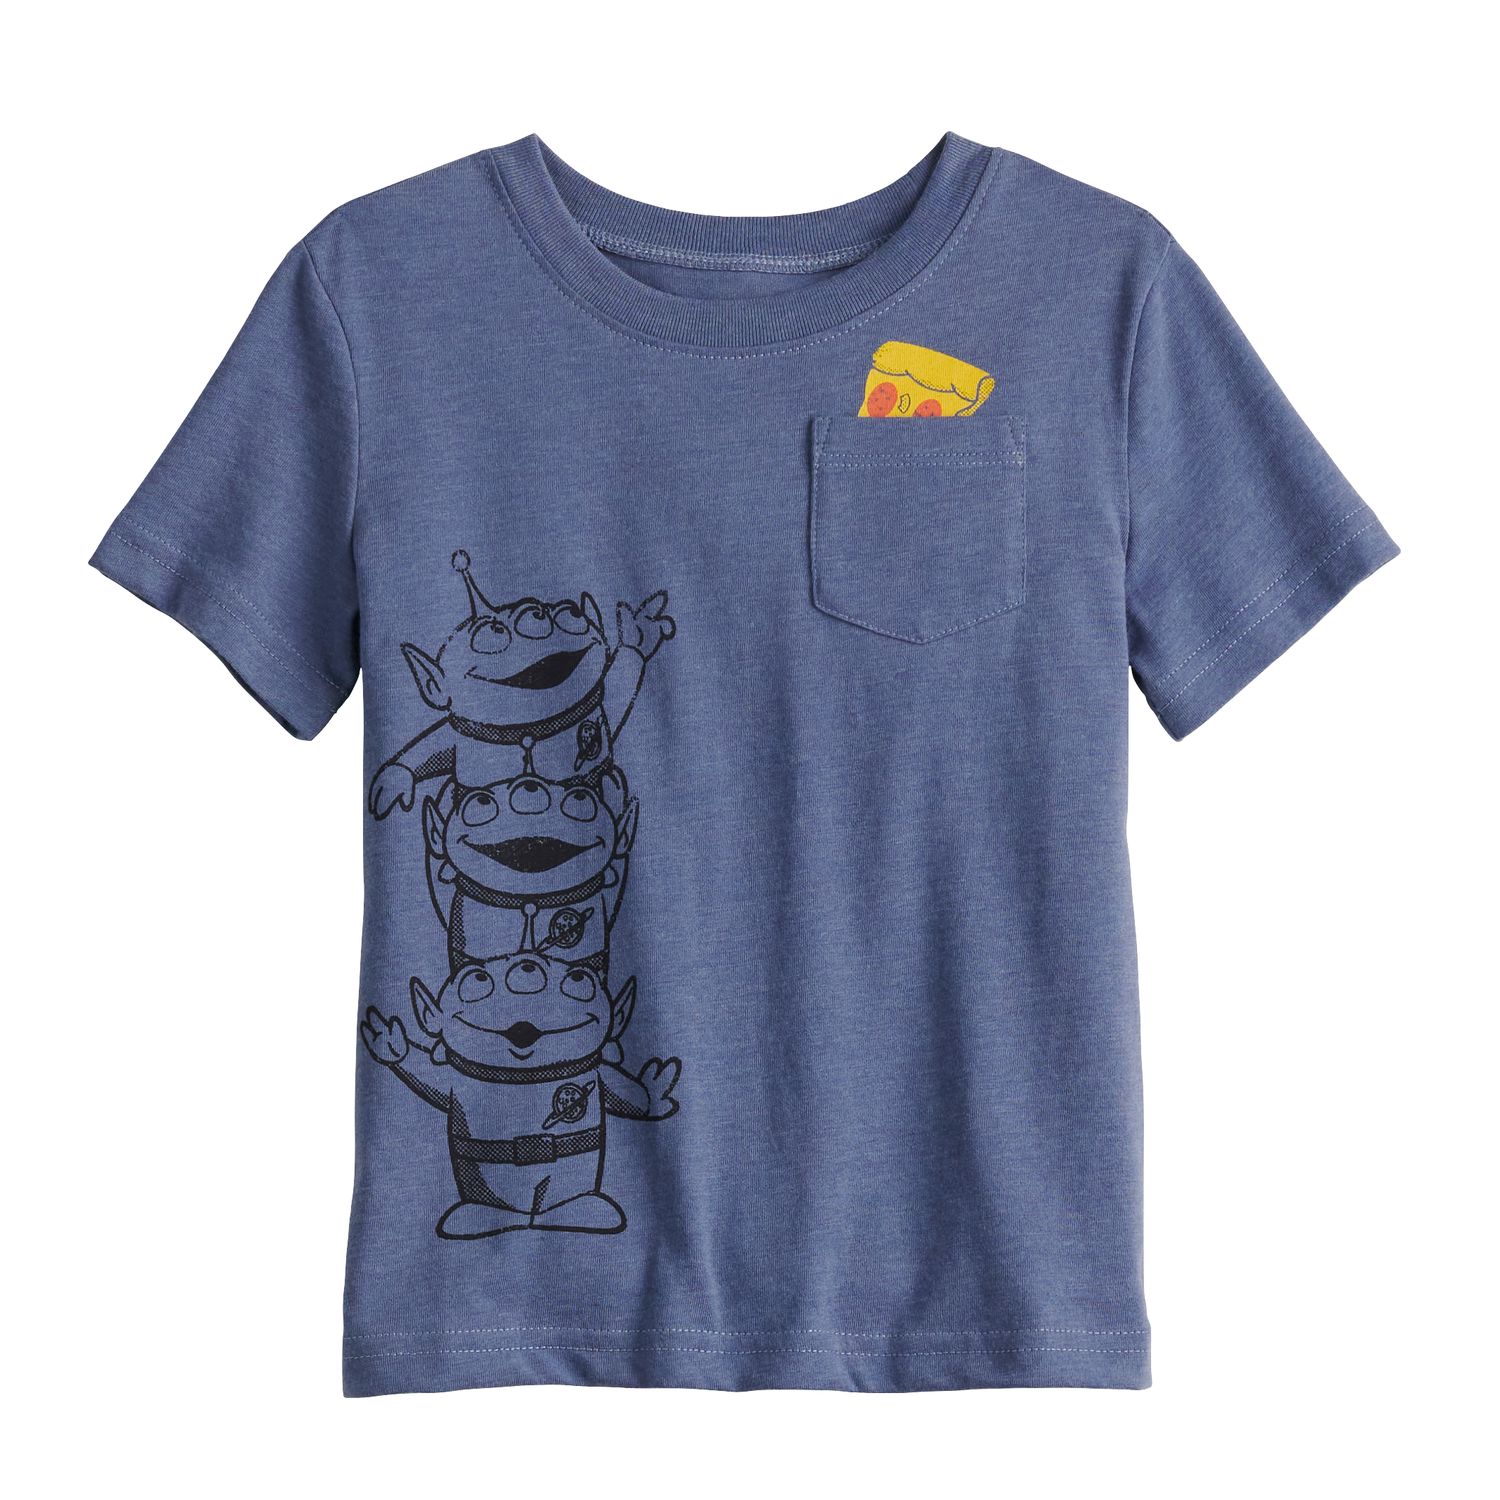 Image for Disney/Jumping Beans Disney / Pixar's Toy Story Toddler Boy Alien Graphic Tee by Jumping Beans® at Kohl's.